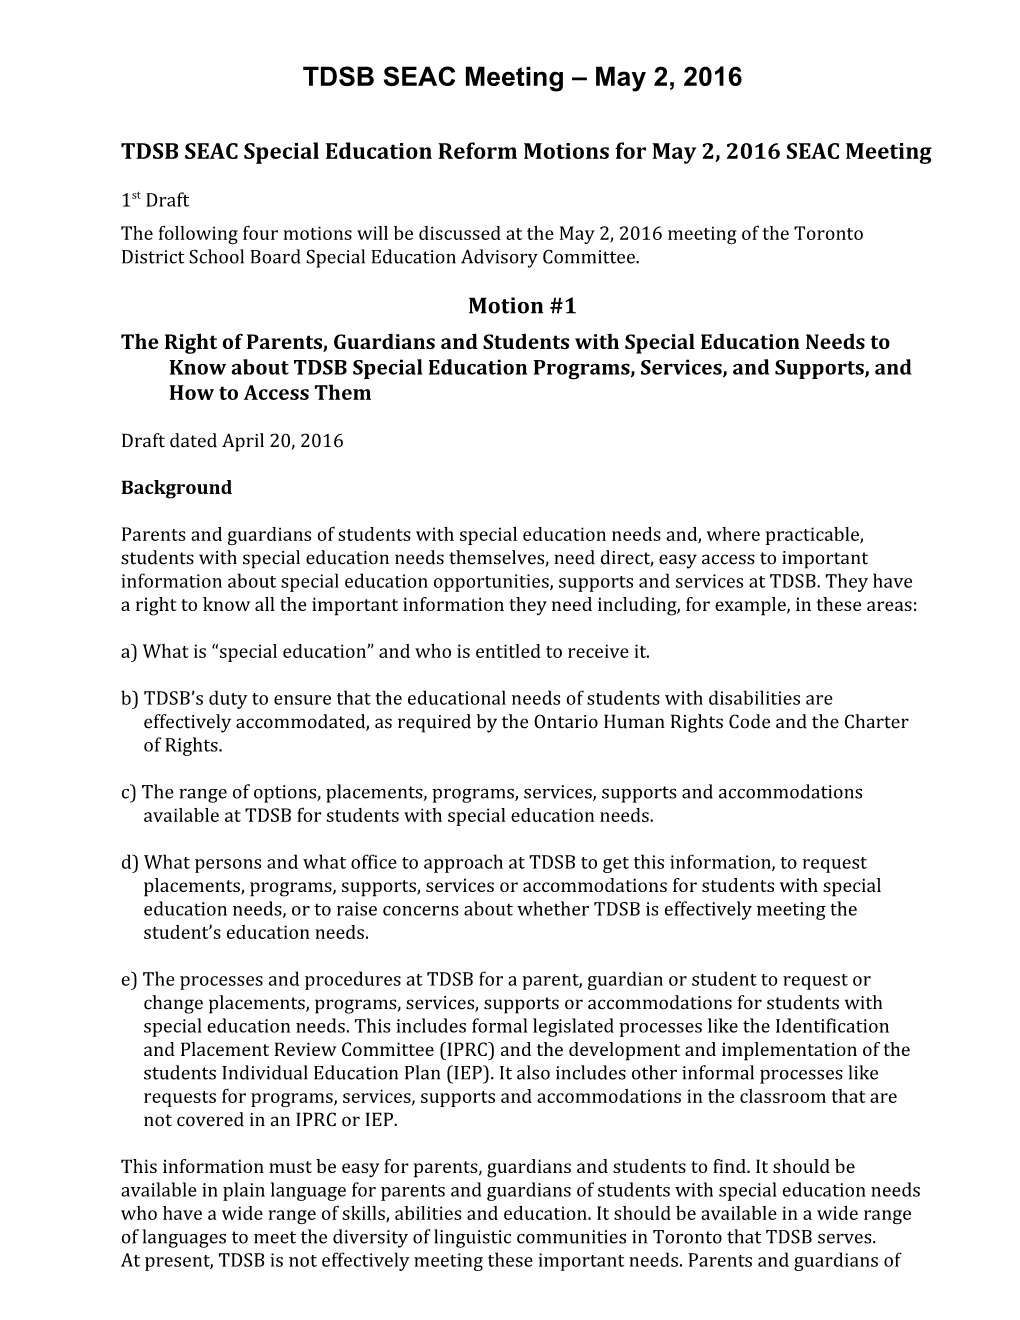 TDSB SEAC Special Education Reform Motions for May 2, 2016 SEAC Meeting